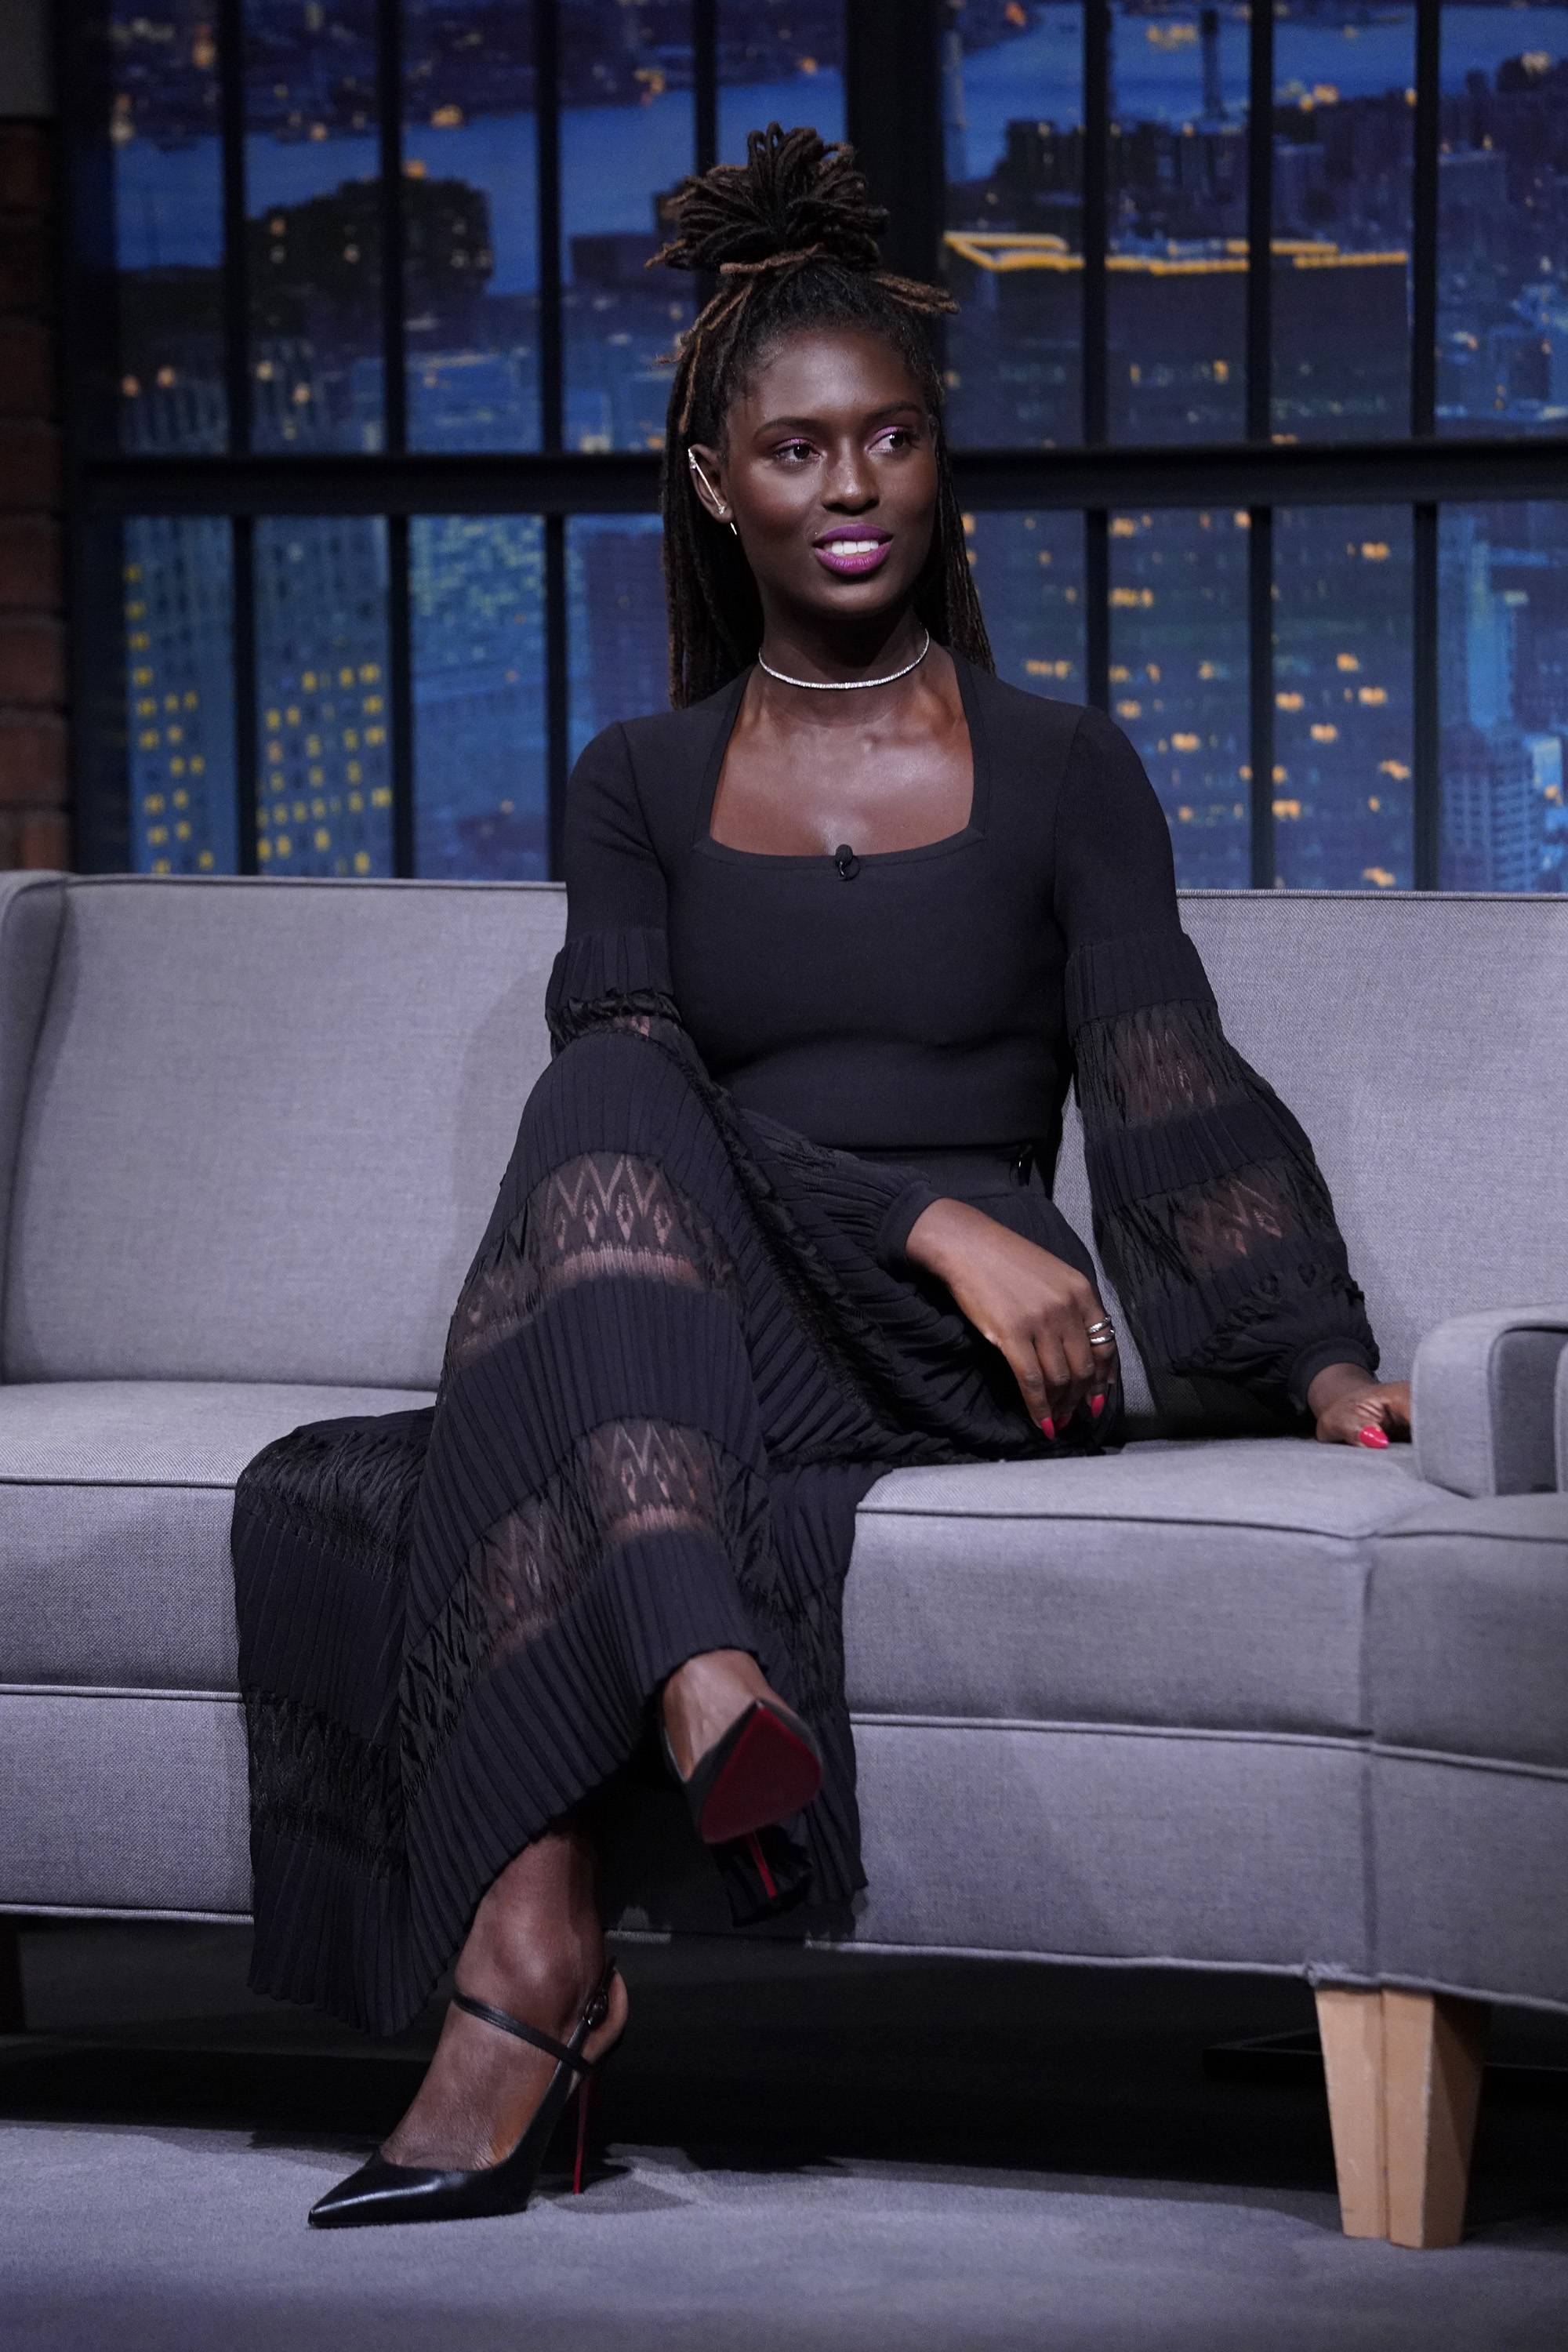 LATE NIGHT WITH SETH MEYERS -- Episode 1140A -- Pictured: Actress Jodie Turner-Smith during an interview with host Seth Meyers on May 4, 2021 -- (Photo by: Lloyd Bishop/NBC)